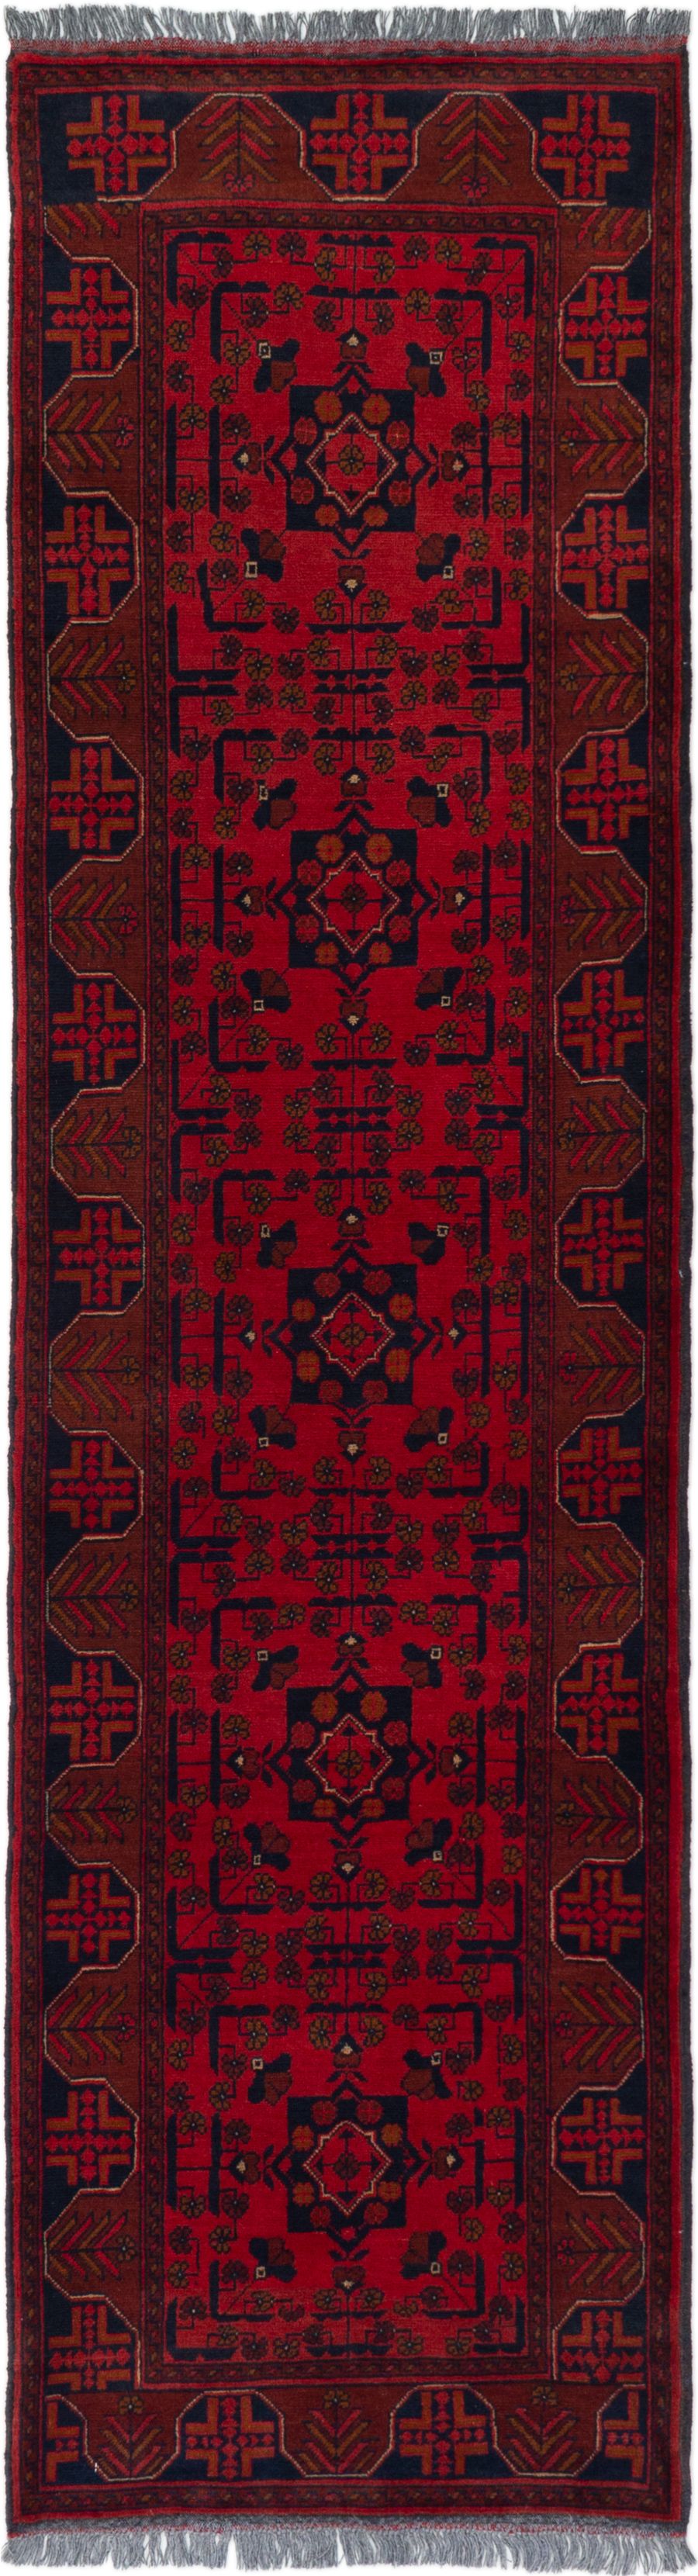 Hand-knotted Finest Khal Mohammadi Red Wool Rug 2'5" x 9'6"  Size: 2'5" x 9'6"  